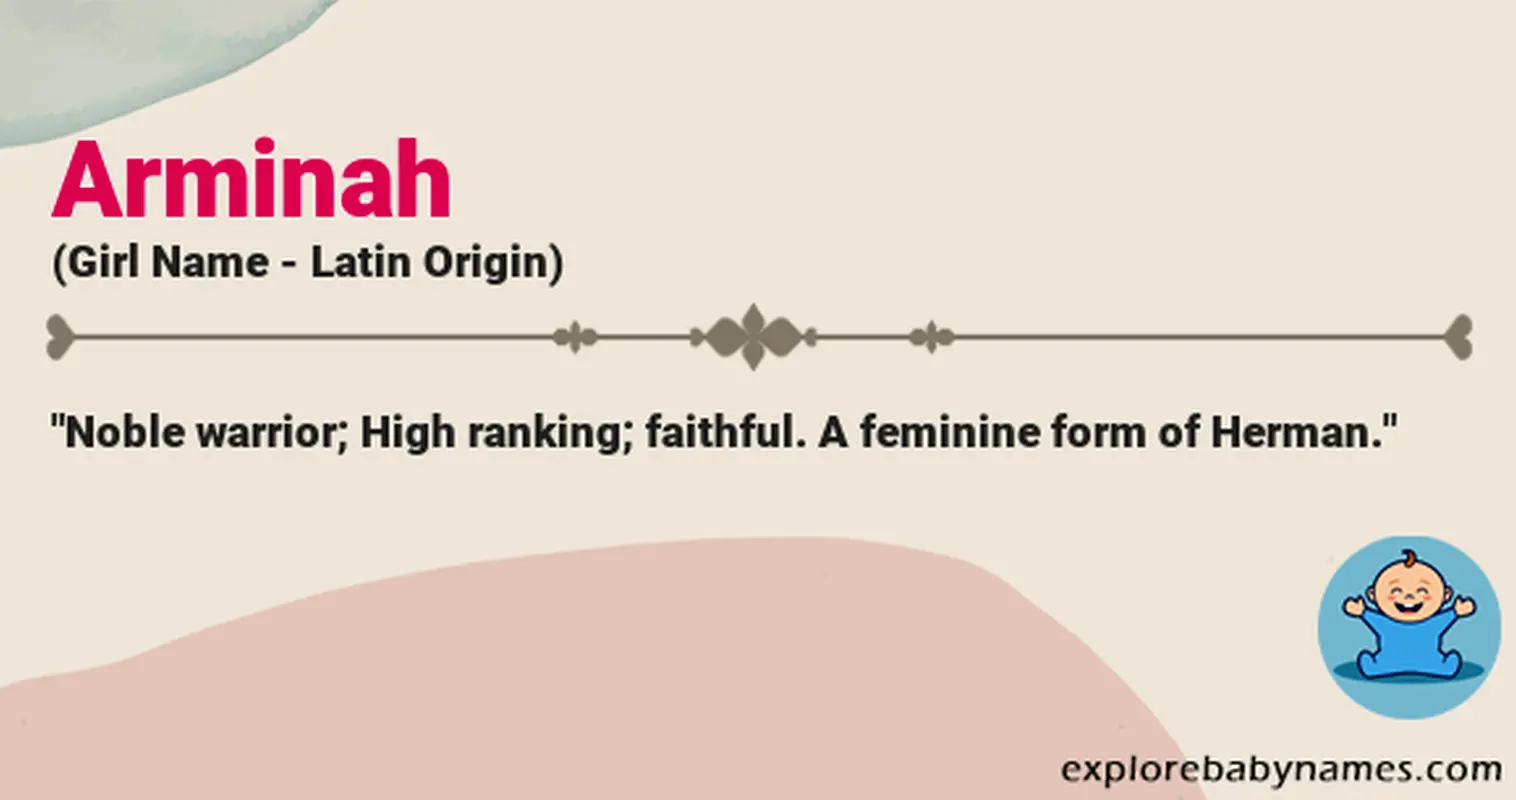 Meaning of Arminah